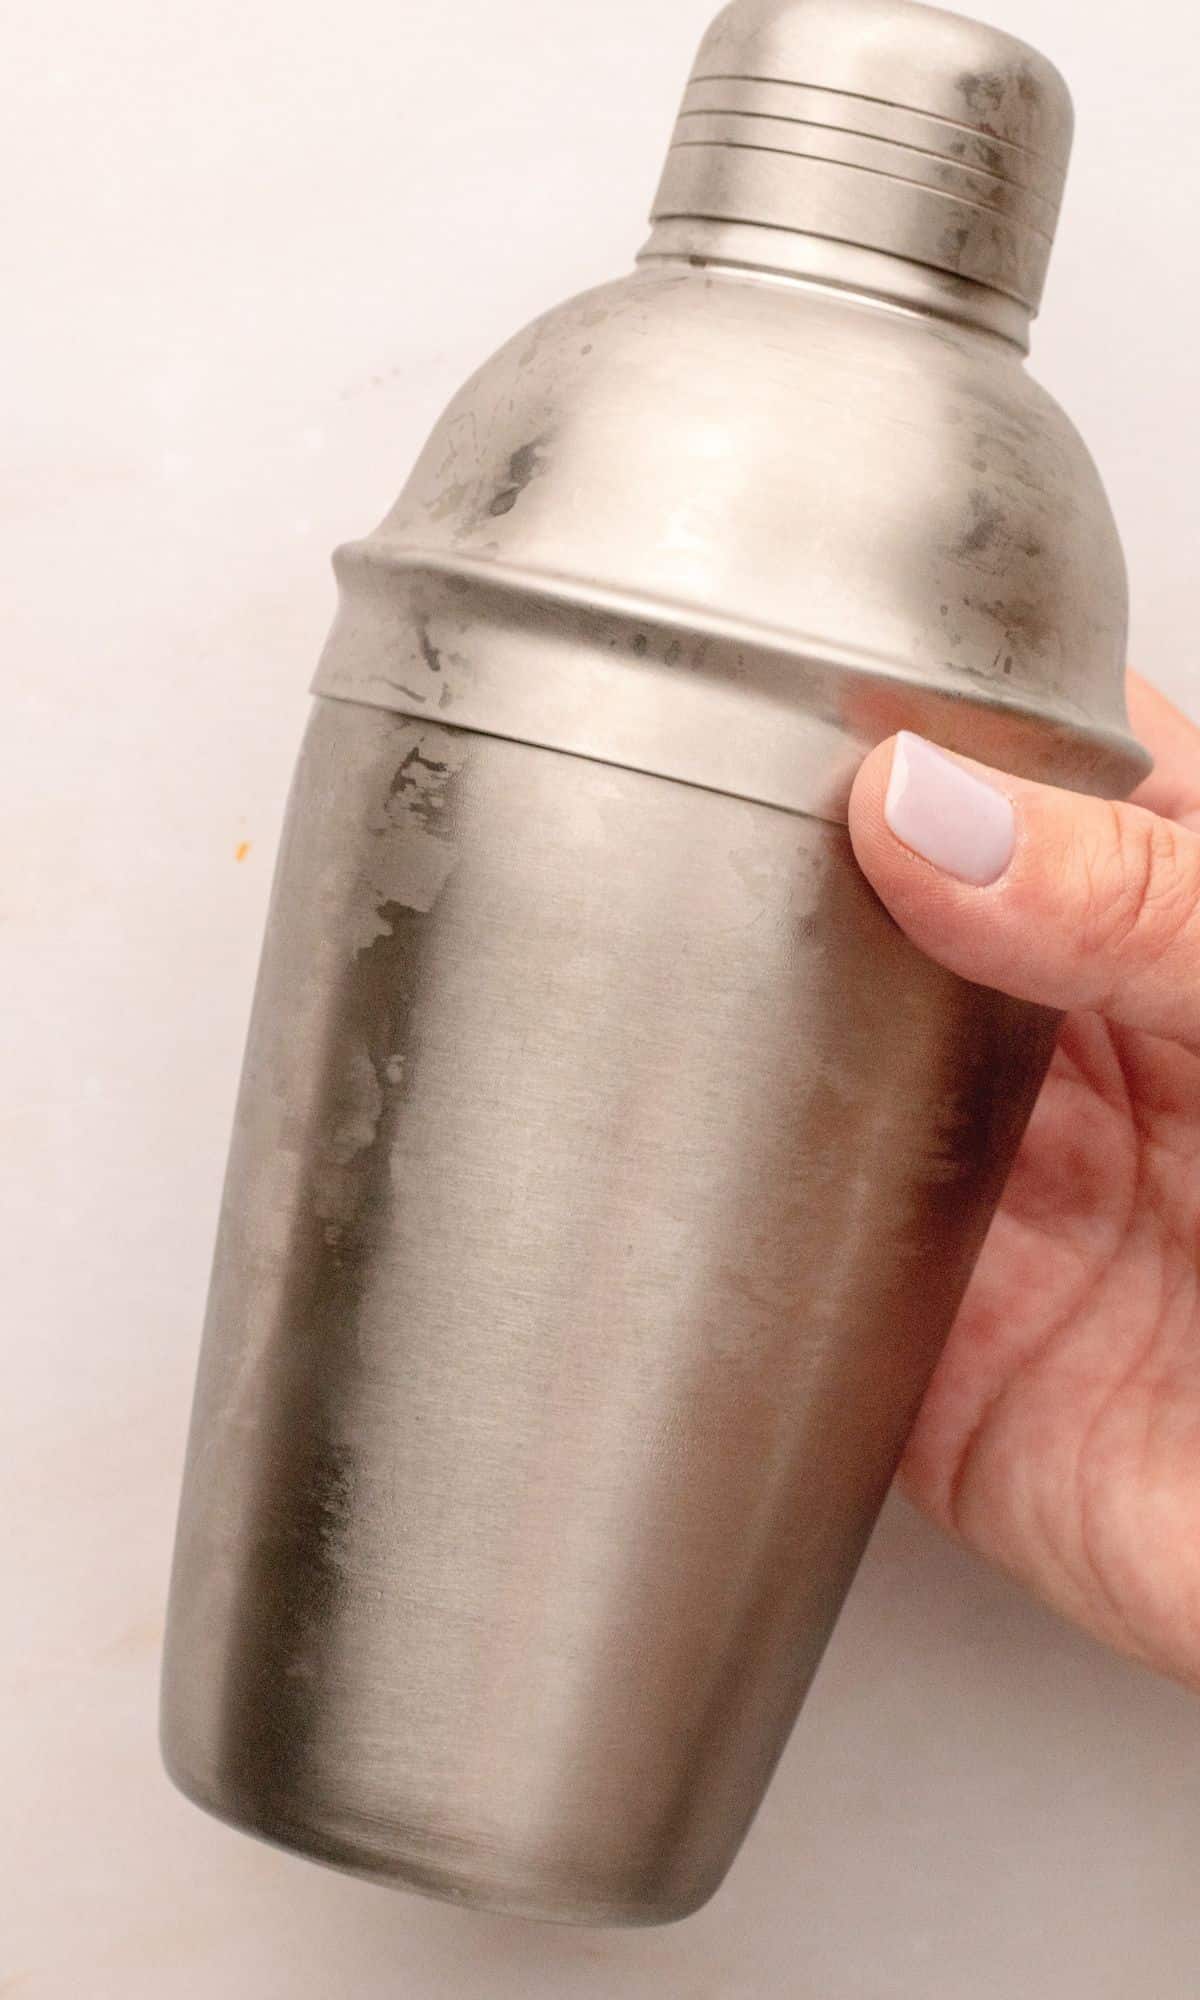 Metal cocktail shaker held in hand with condensation.